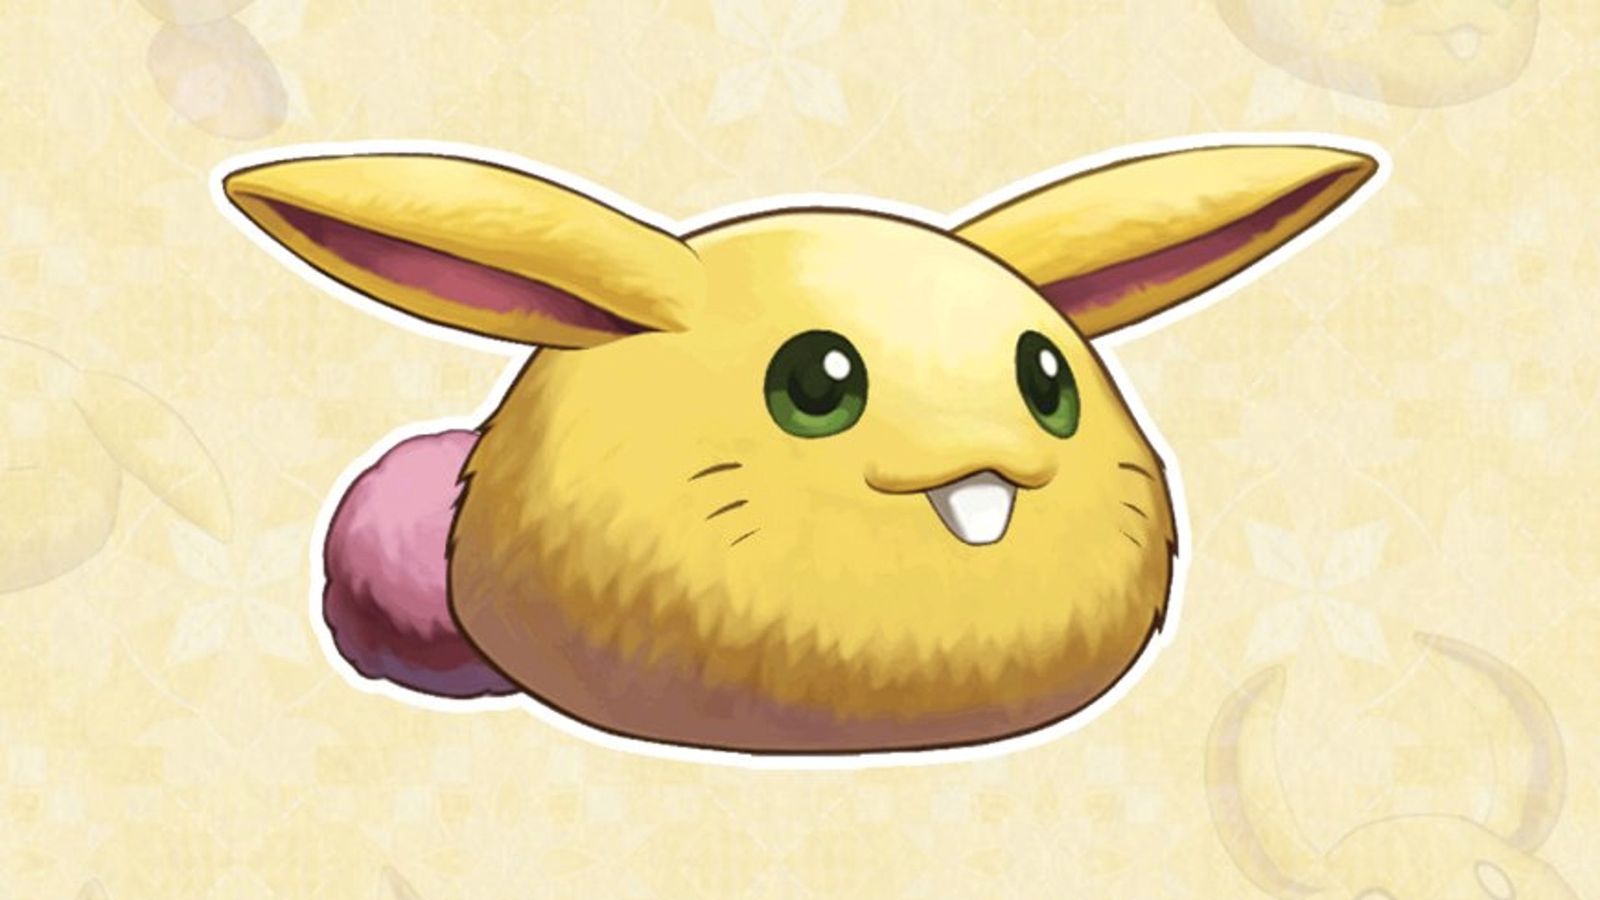 Image of Rabite in Echoes of Mana.